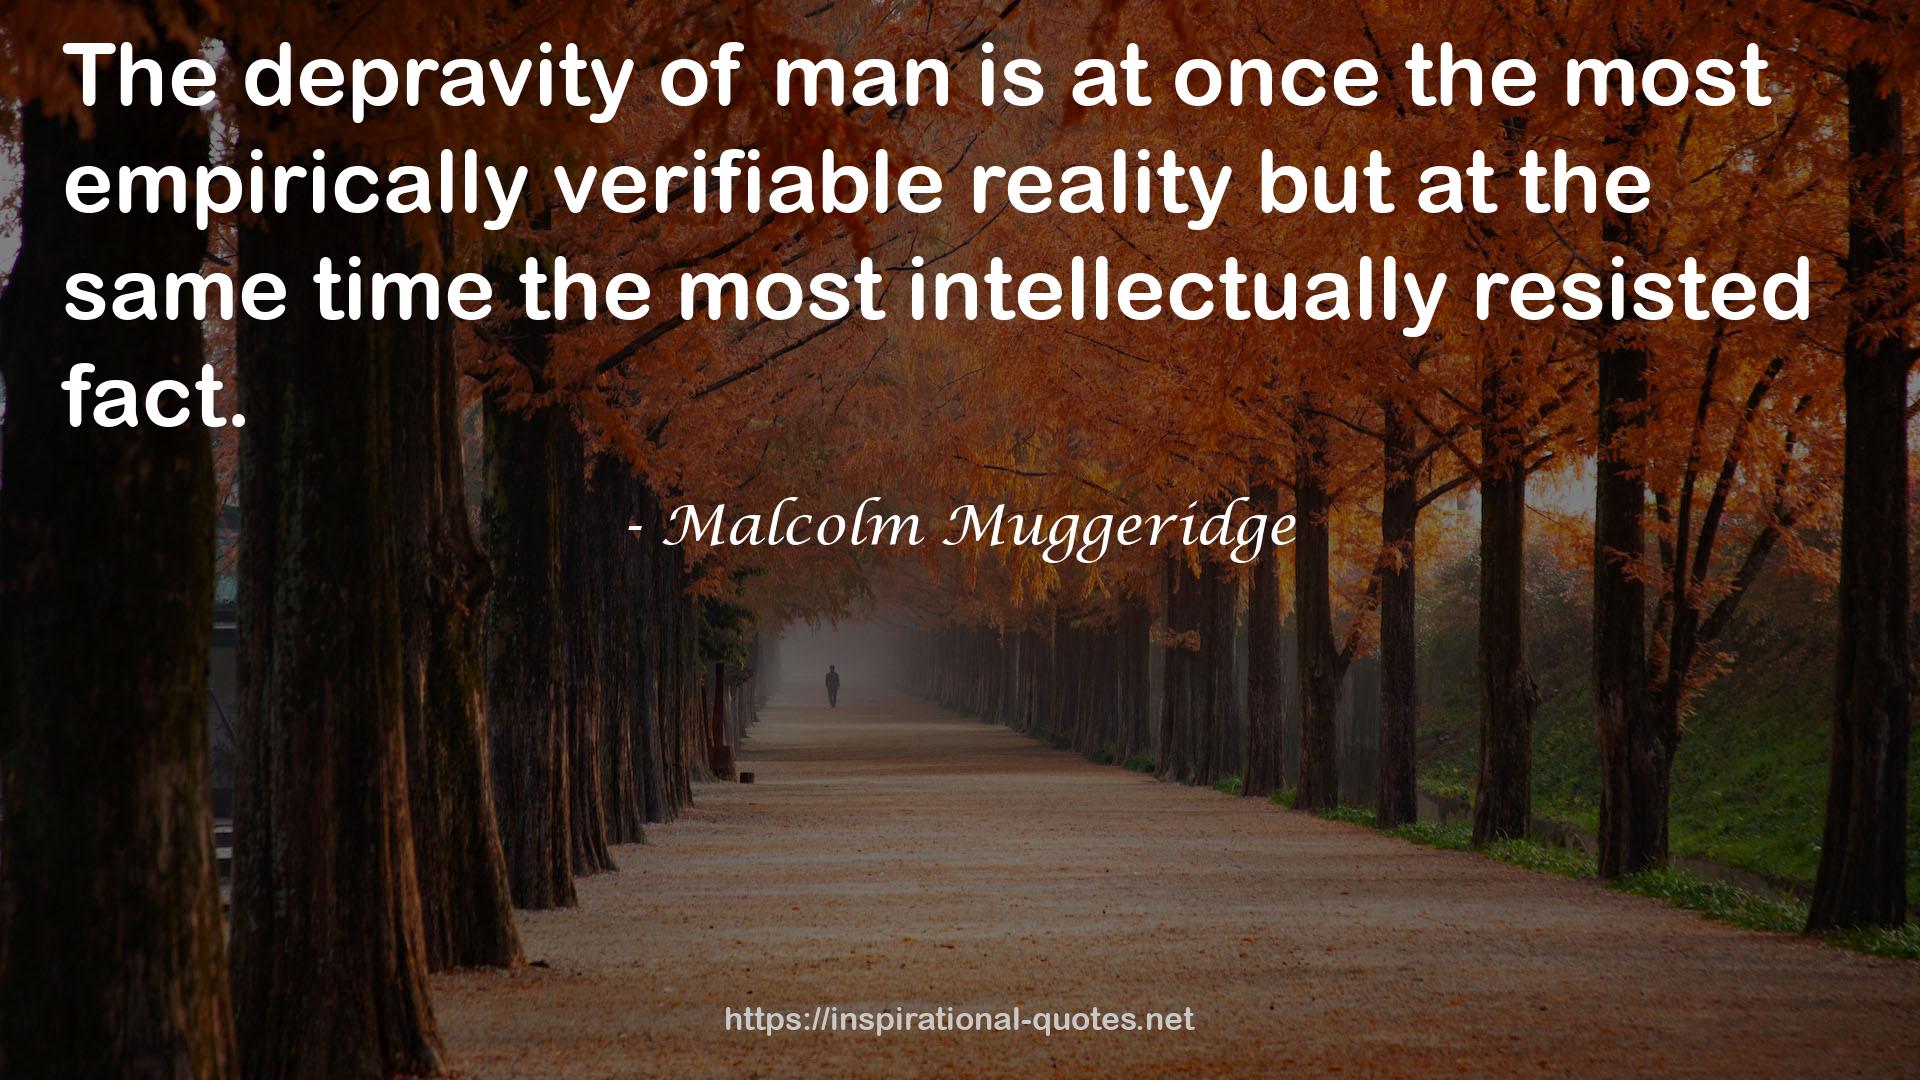 the most empirically verifiable reality  QUOTES